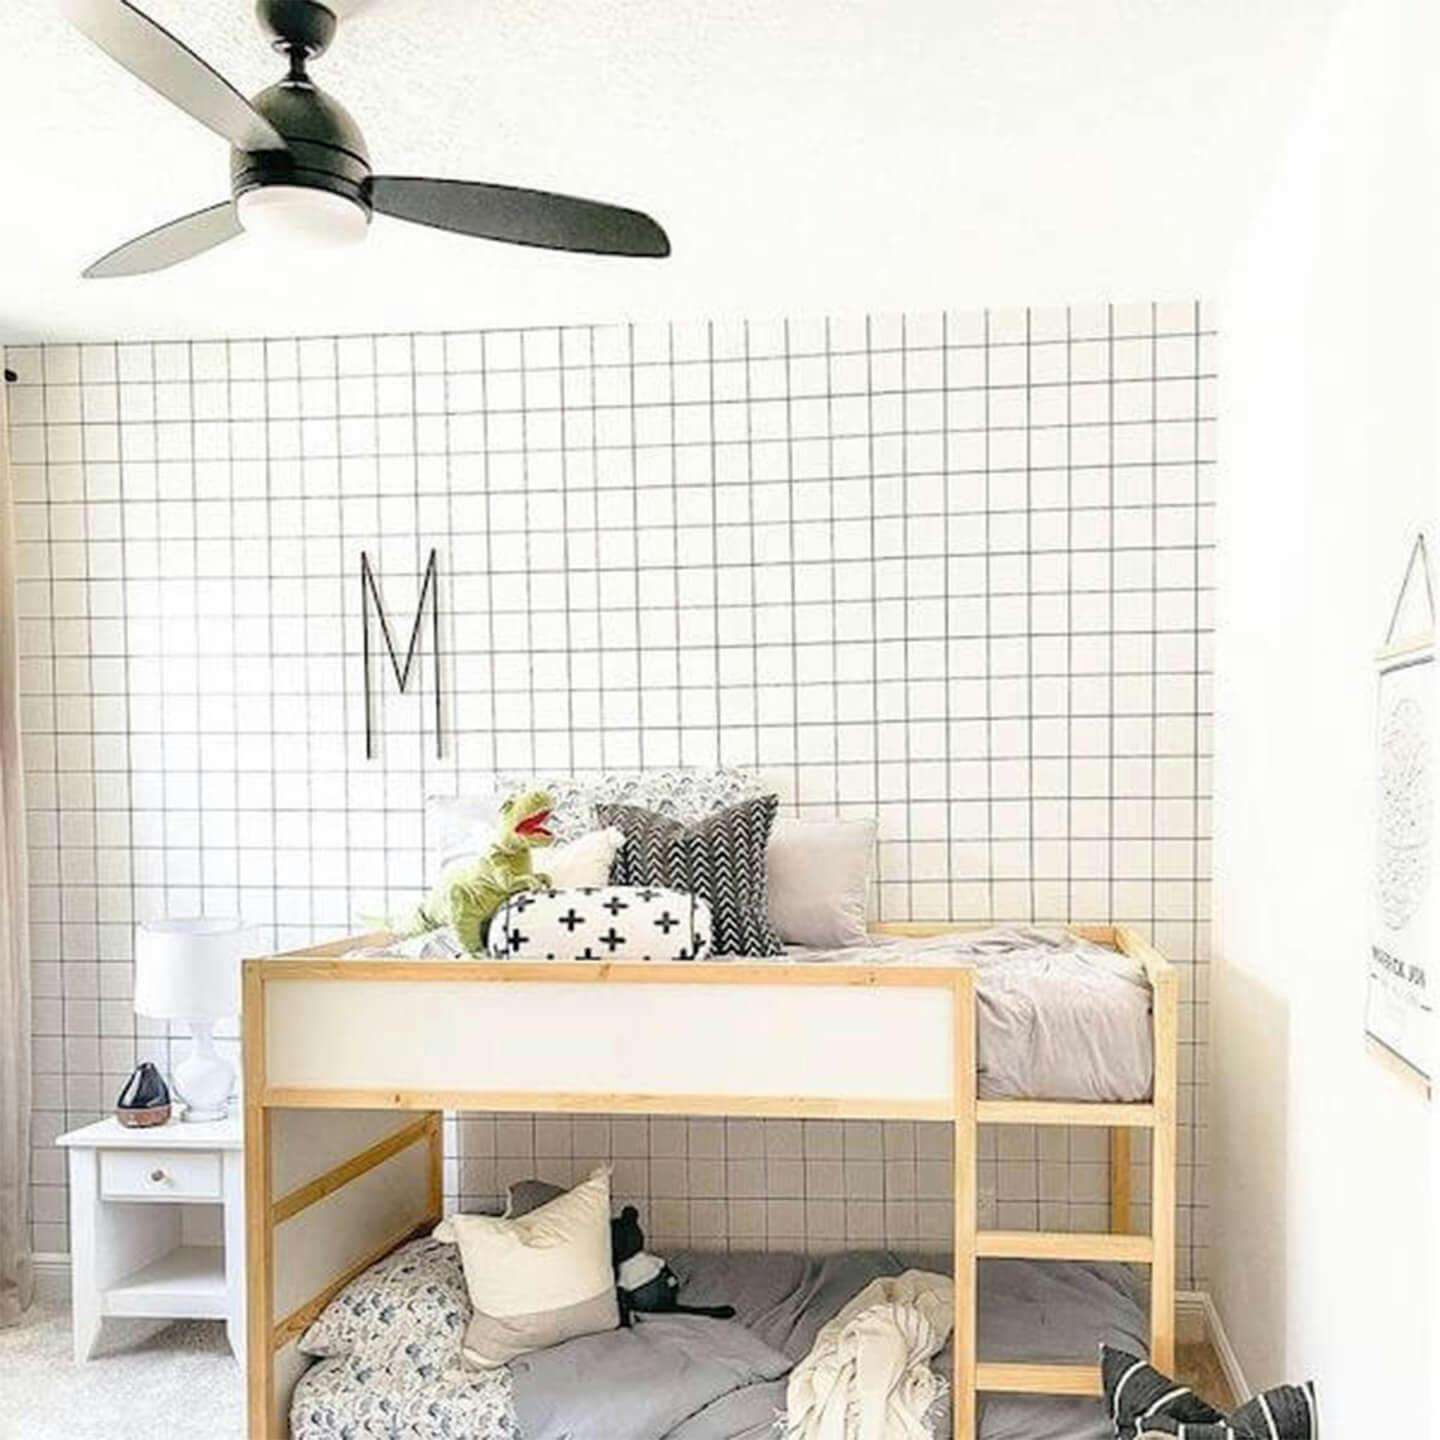 Child's bedroom with Kichler ceiling fan